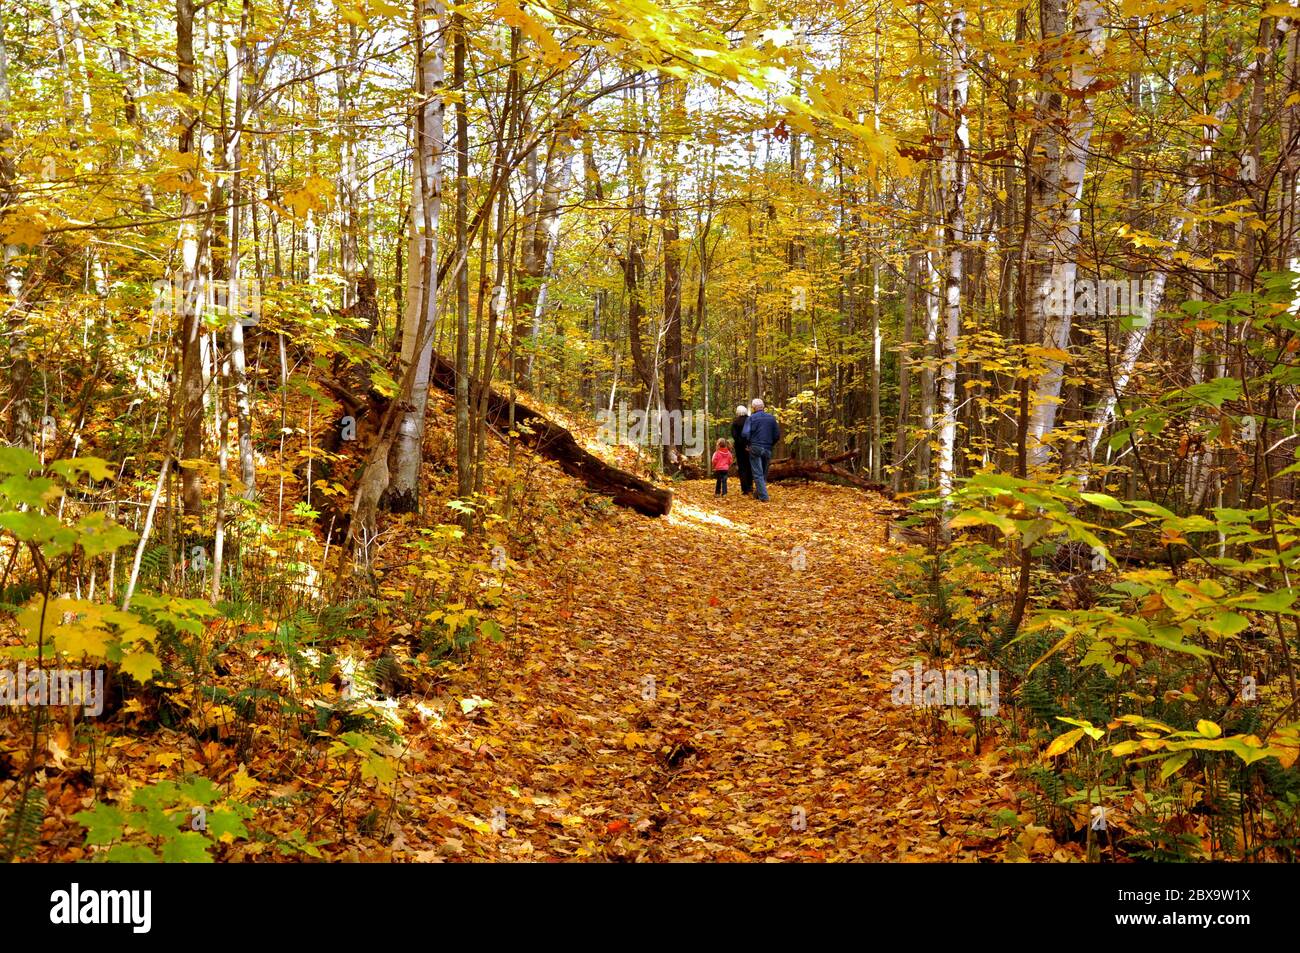 King City, Ontario / Canada - 10/17/2008: Child walking in the natural parkland with the grandparents. Stock Photo